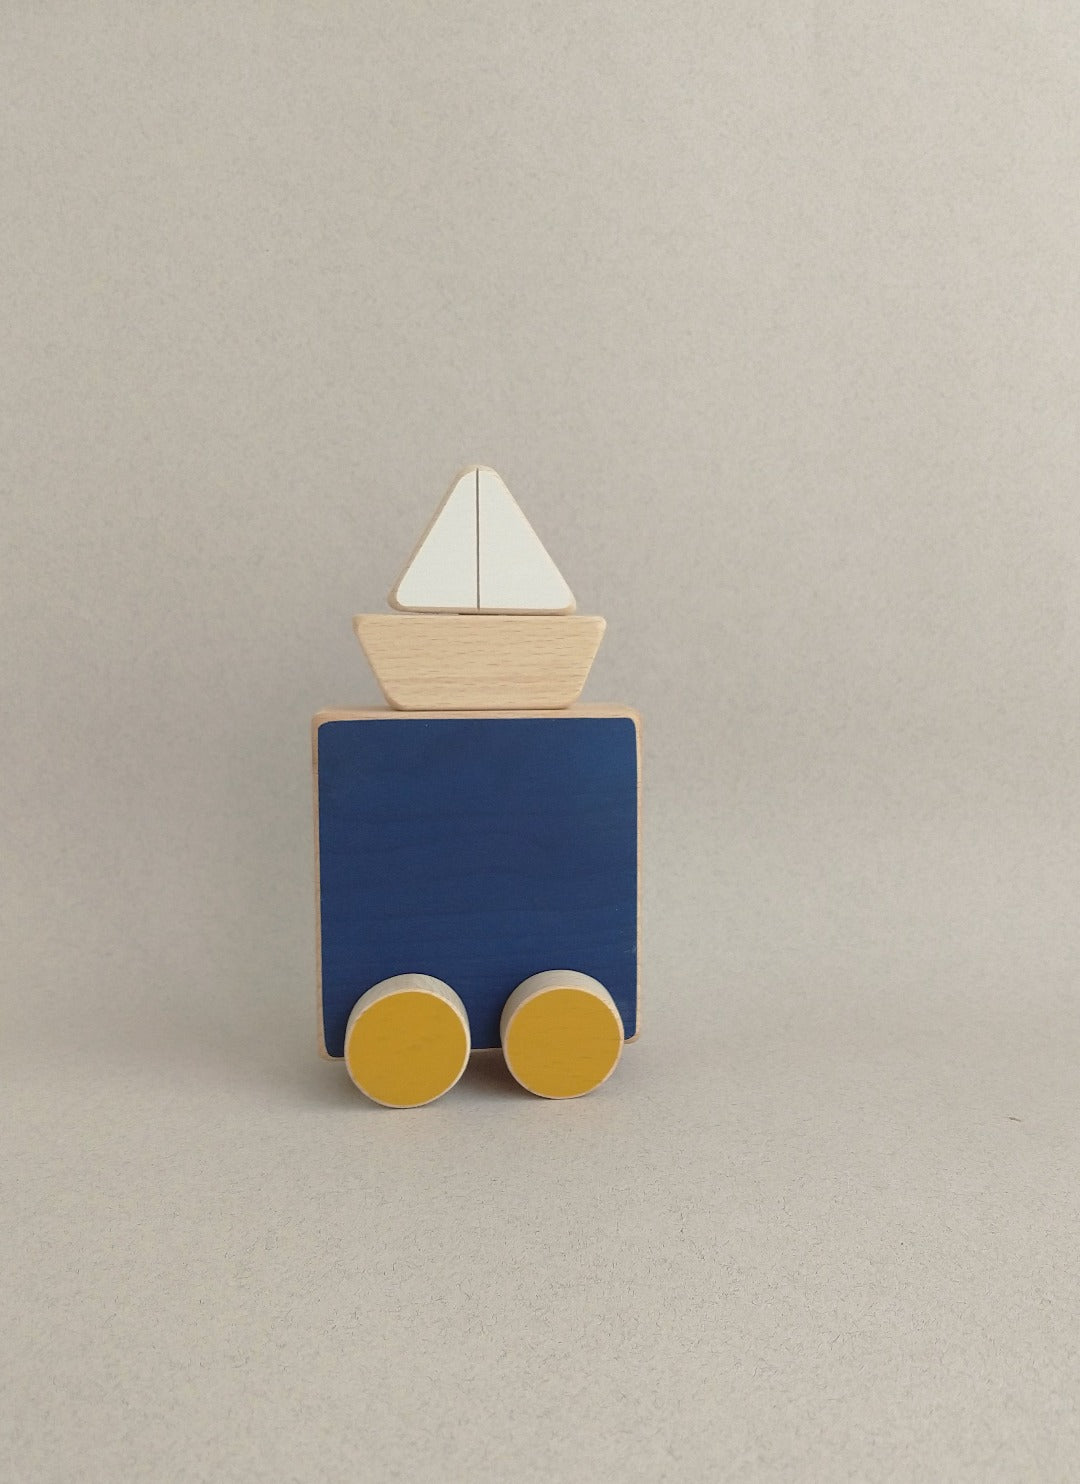 A poetic wooden toy on wheels (with a sea an a boat) drawn from the world of illustration.